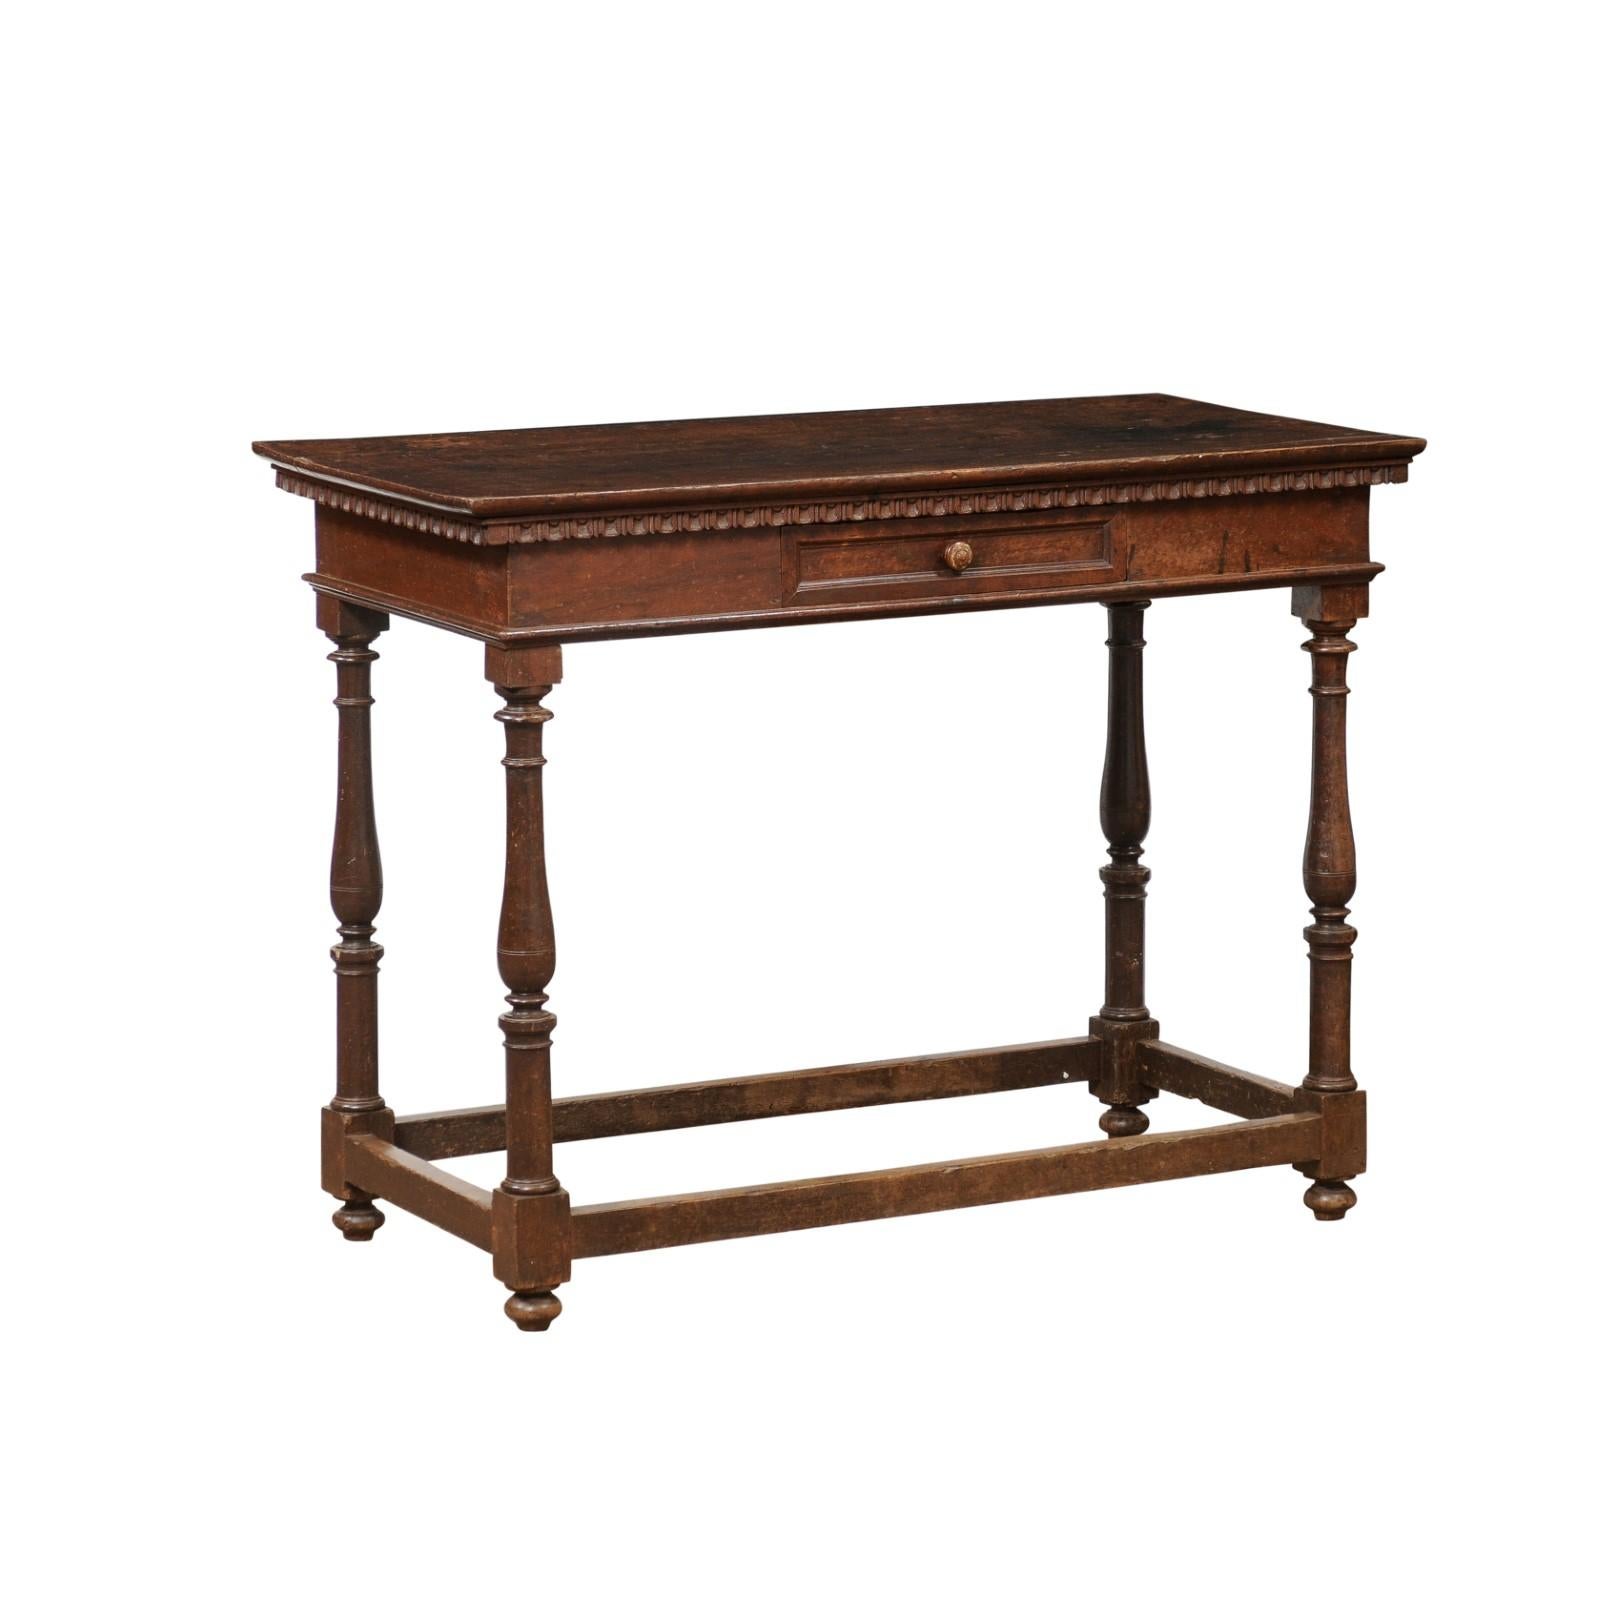 17th Century Italian Walnut Narrow Console / Center Table with Drawer and Turned Legs